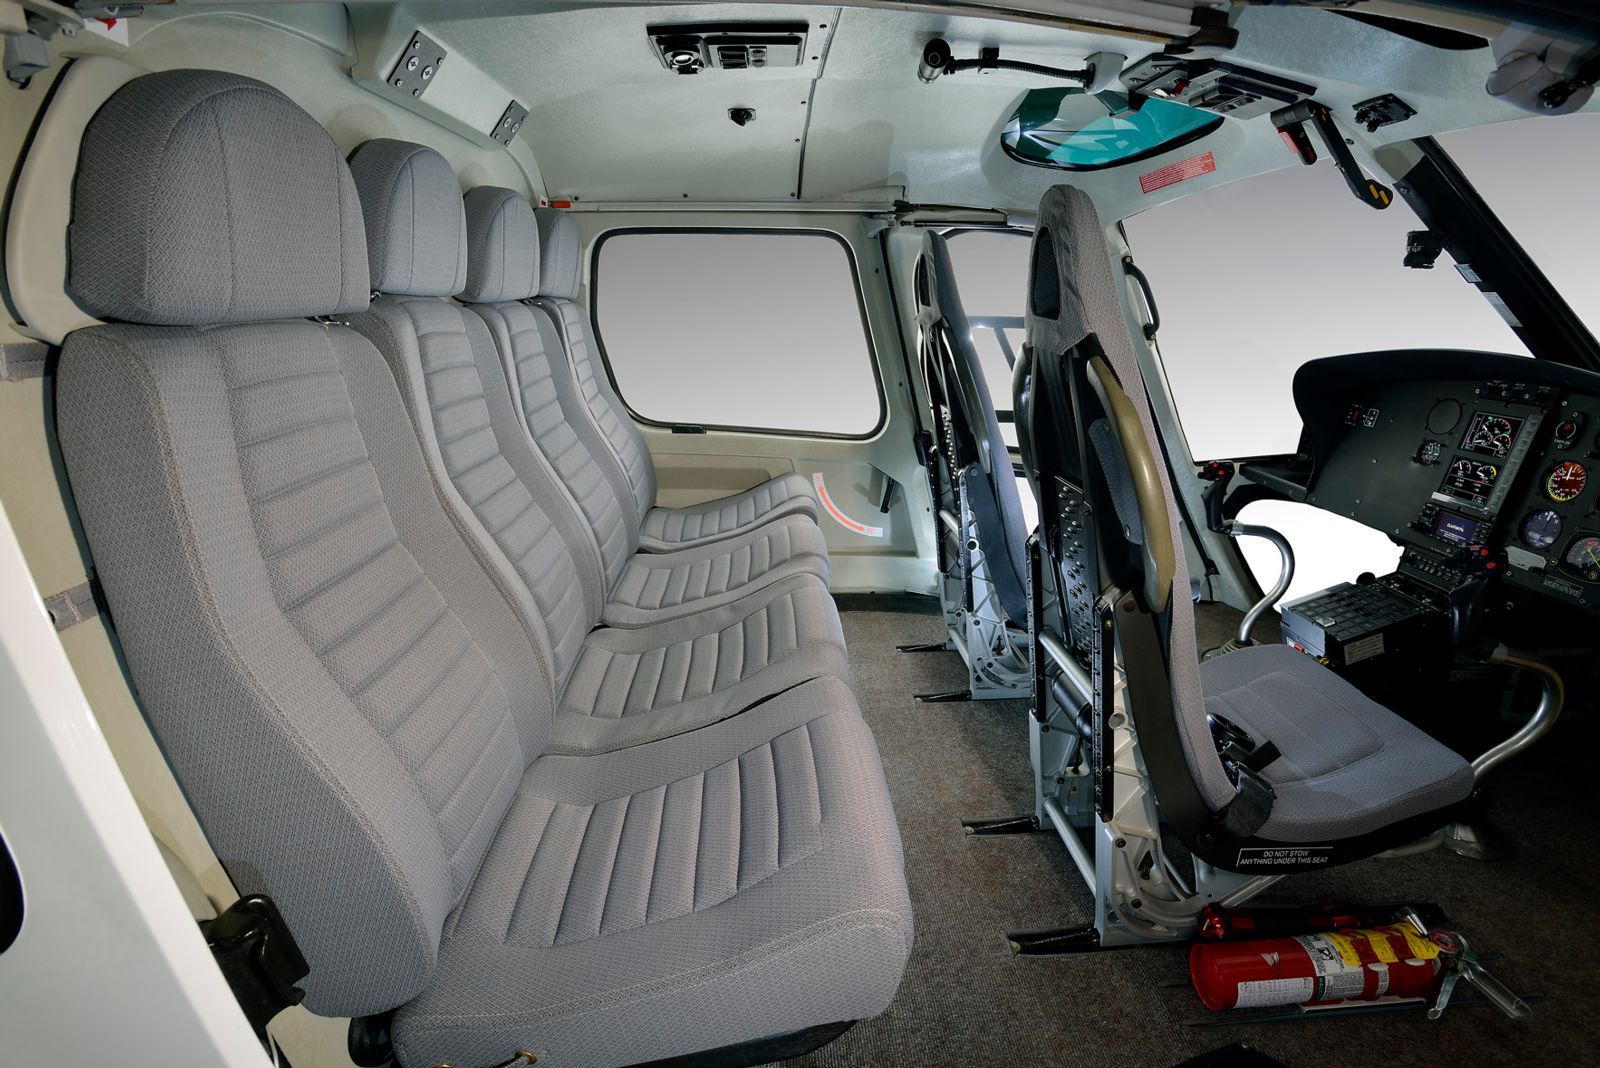 Eurocopter AS350 B3  S/N 4508 for sale | gallery image: /userfiles/images/Eurocopter_AS350B3_sn4508/int1c_072.jpg